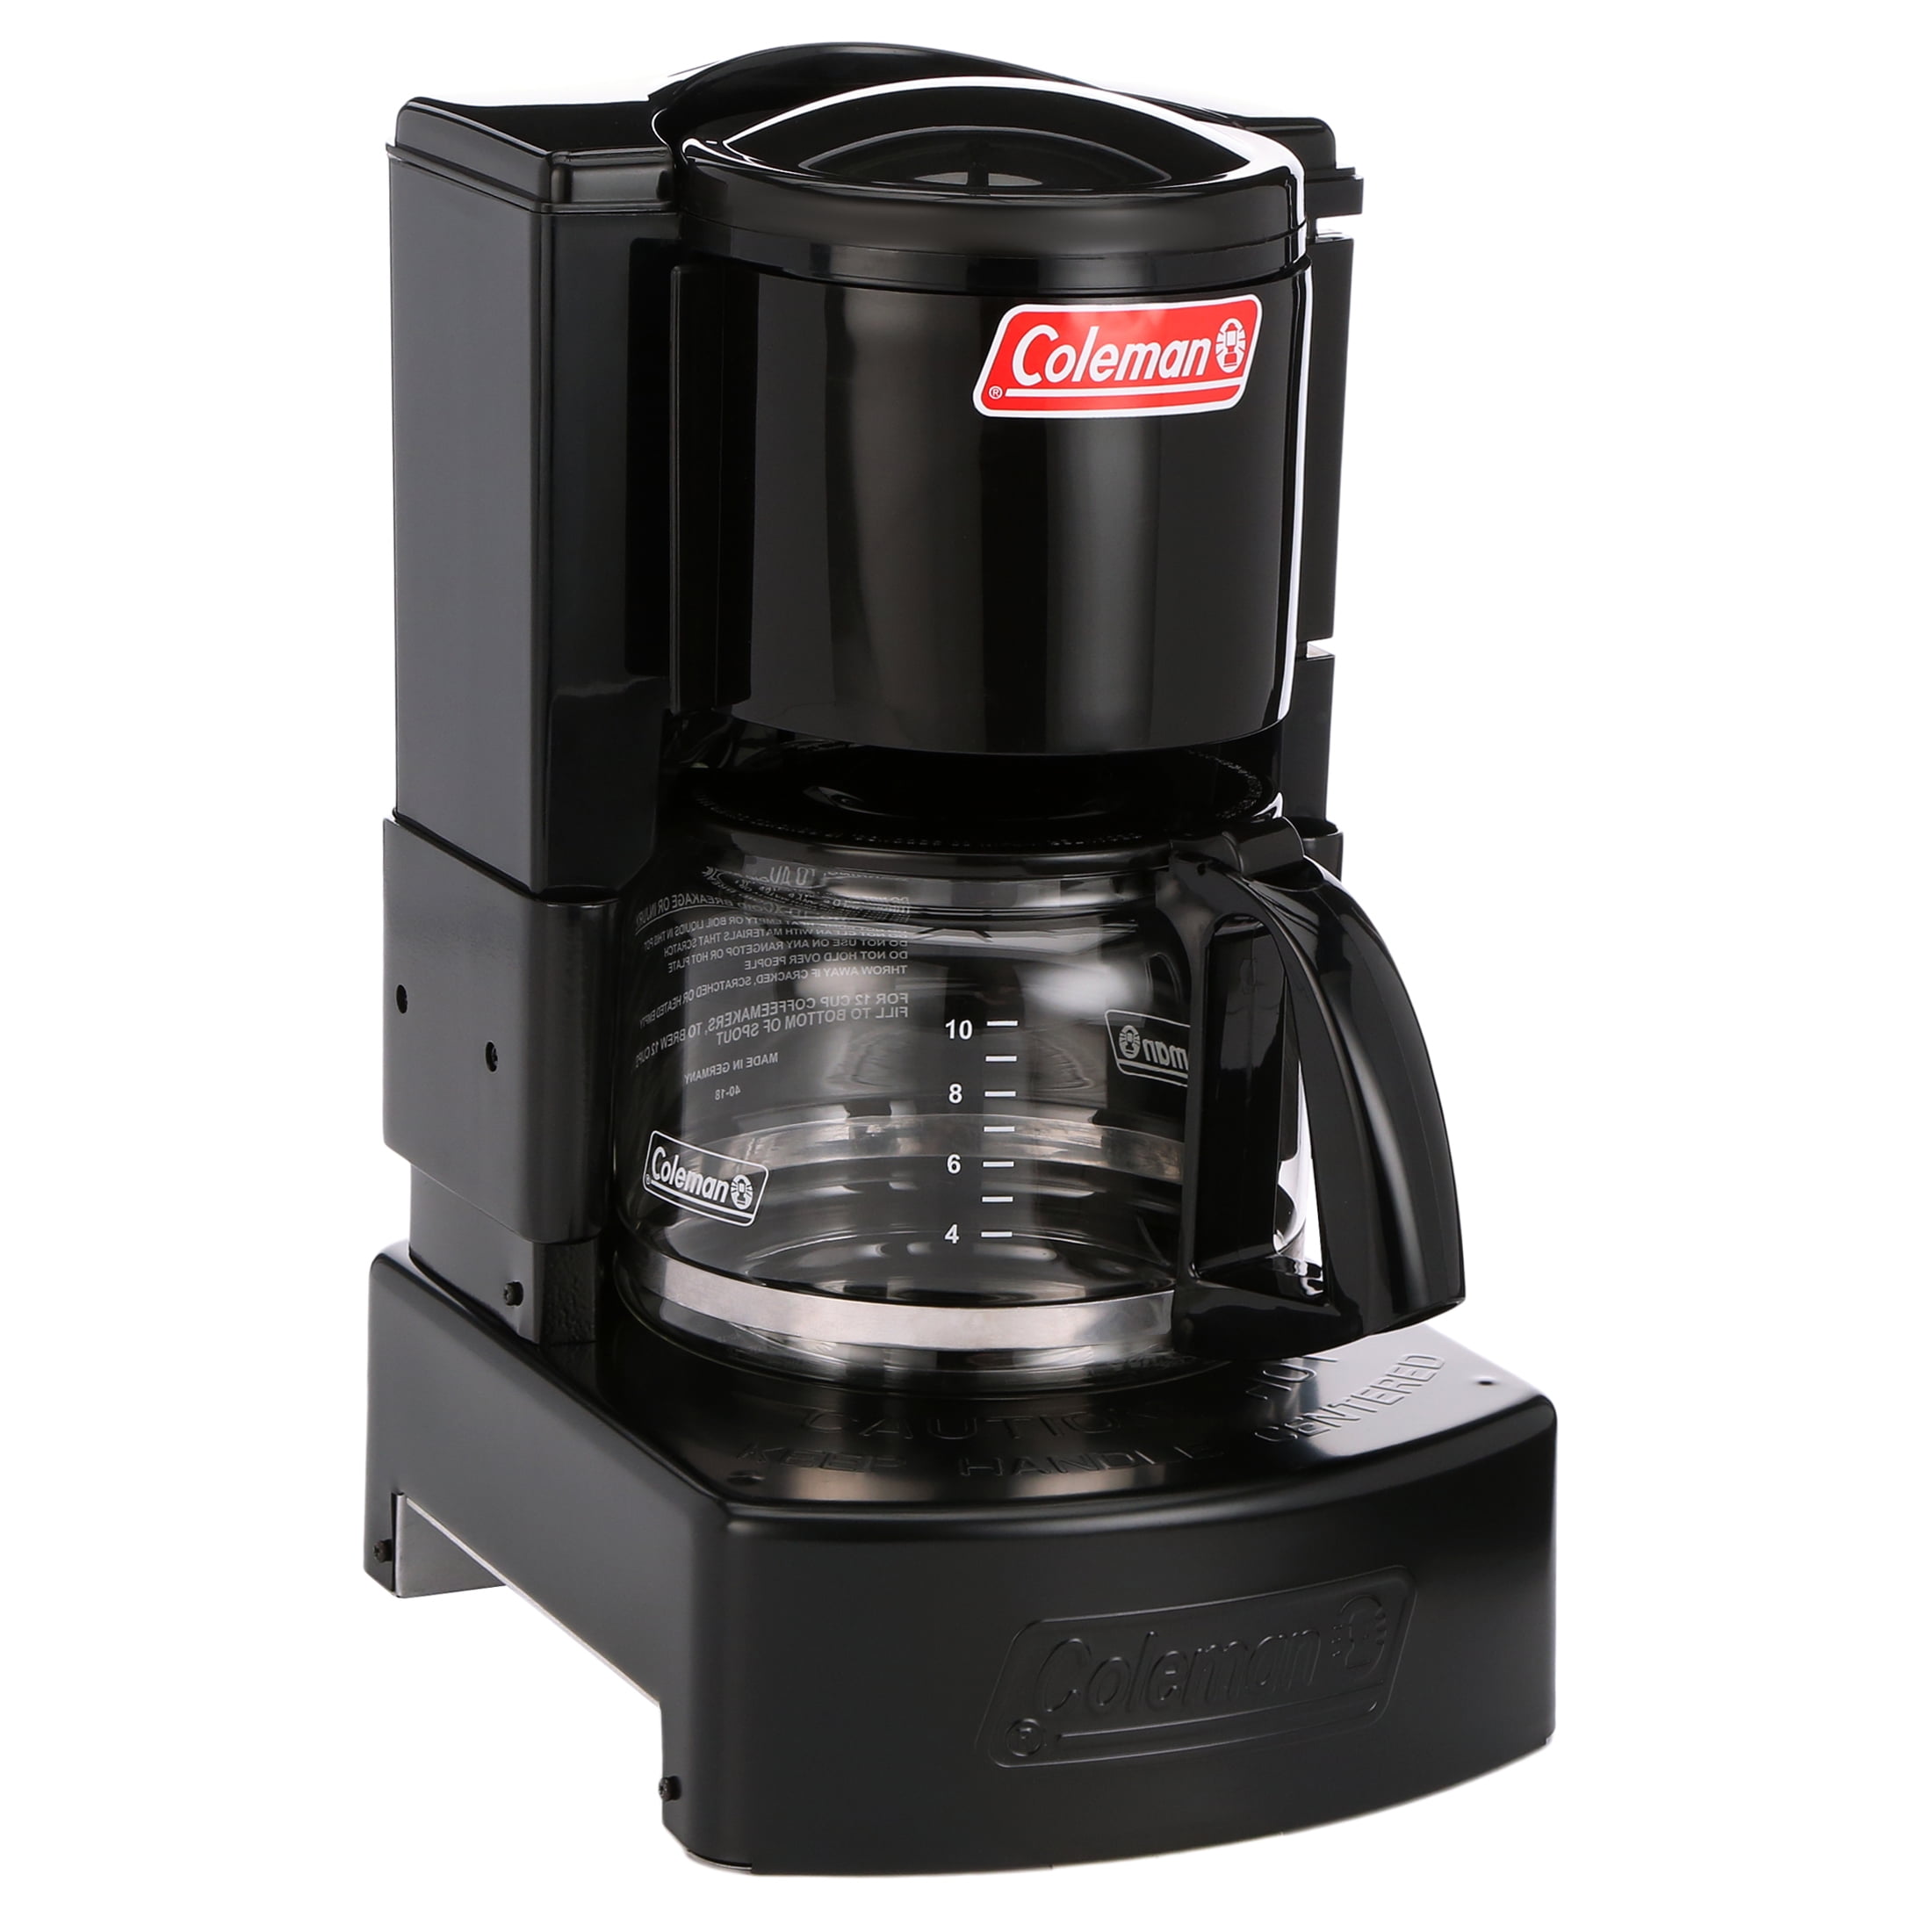  Coleman 5008C700T Camping Coffeemaker, Black : Camping Coffee  And Tea Pots : Sports & Outdoors